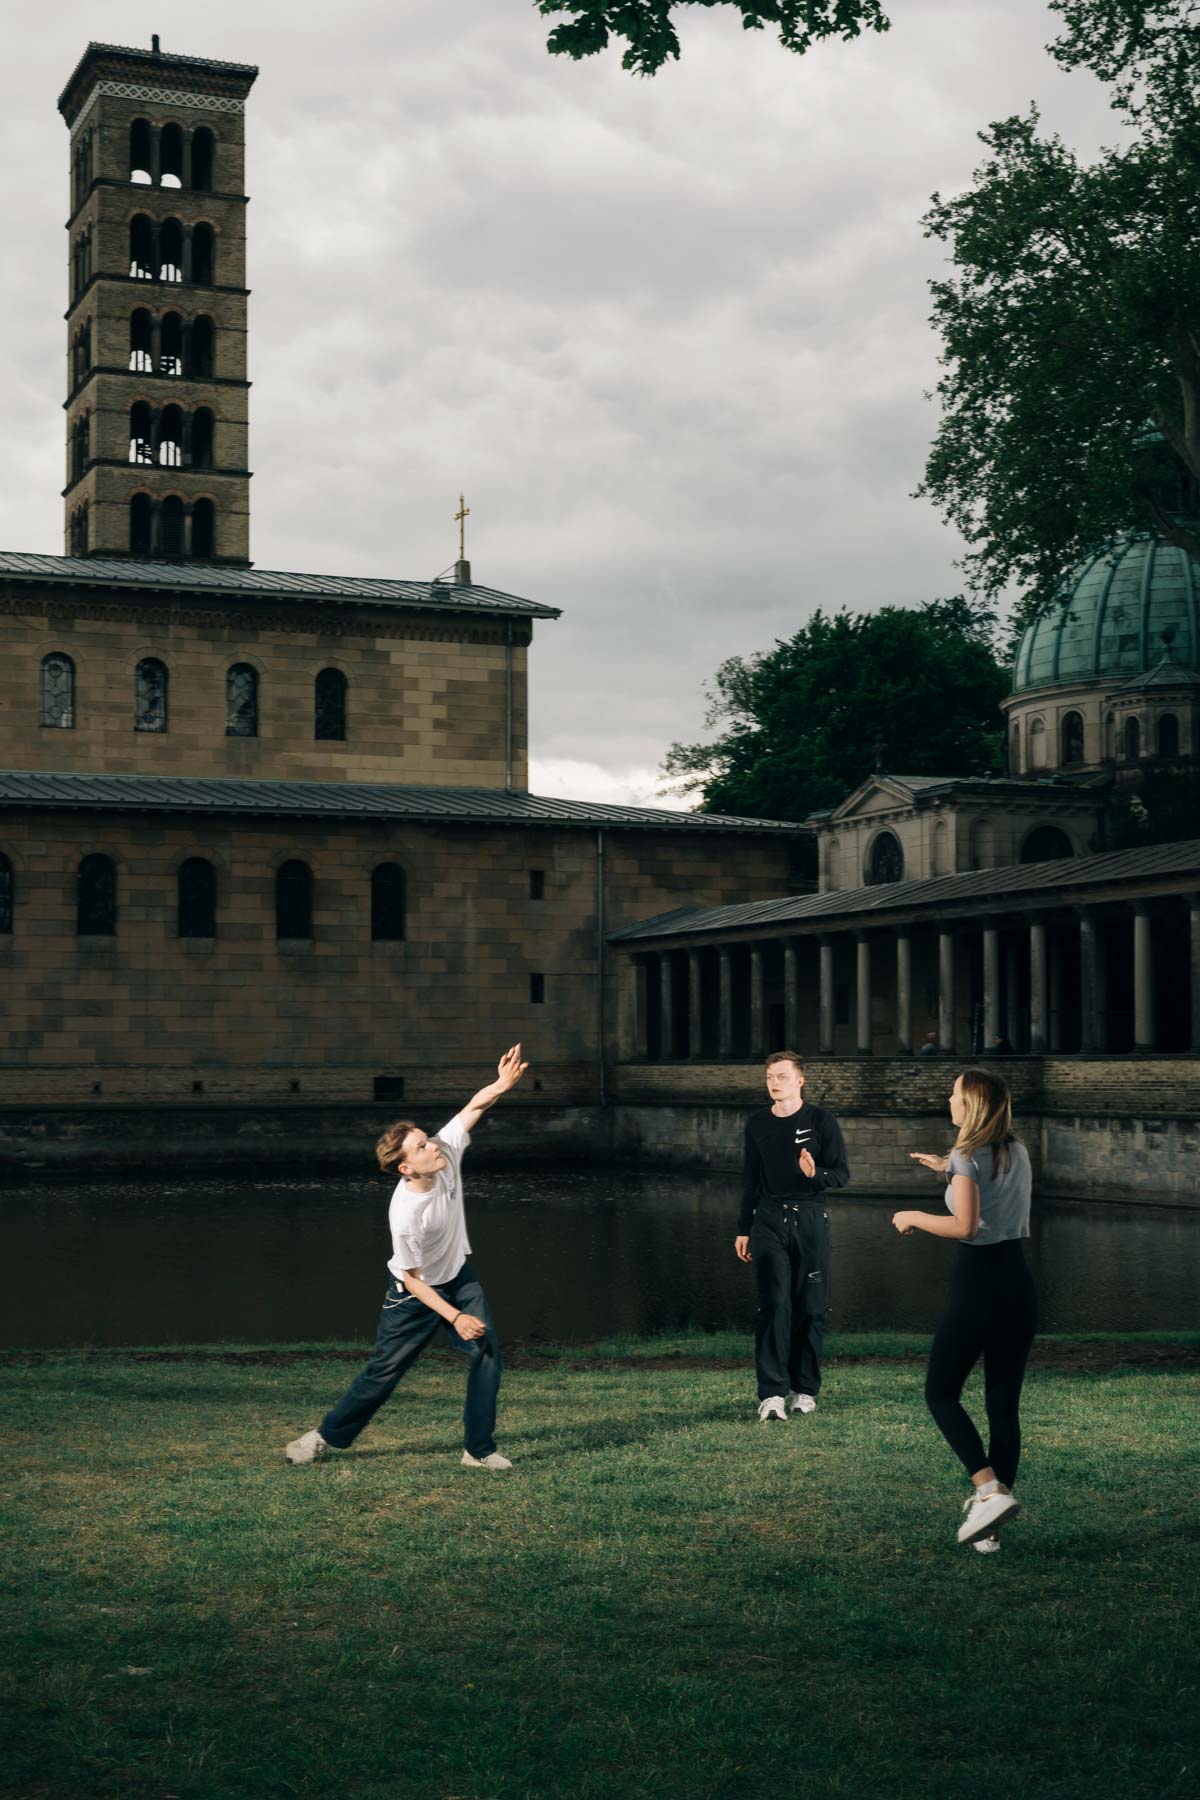 Most schools in Germany were temporarily closed due to the corona crisis. Anton, Tillmann and Jette play one morning in May in a park in Potsdam, as they have only two days a week lessons in the school building.